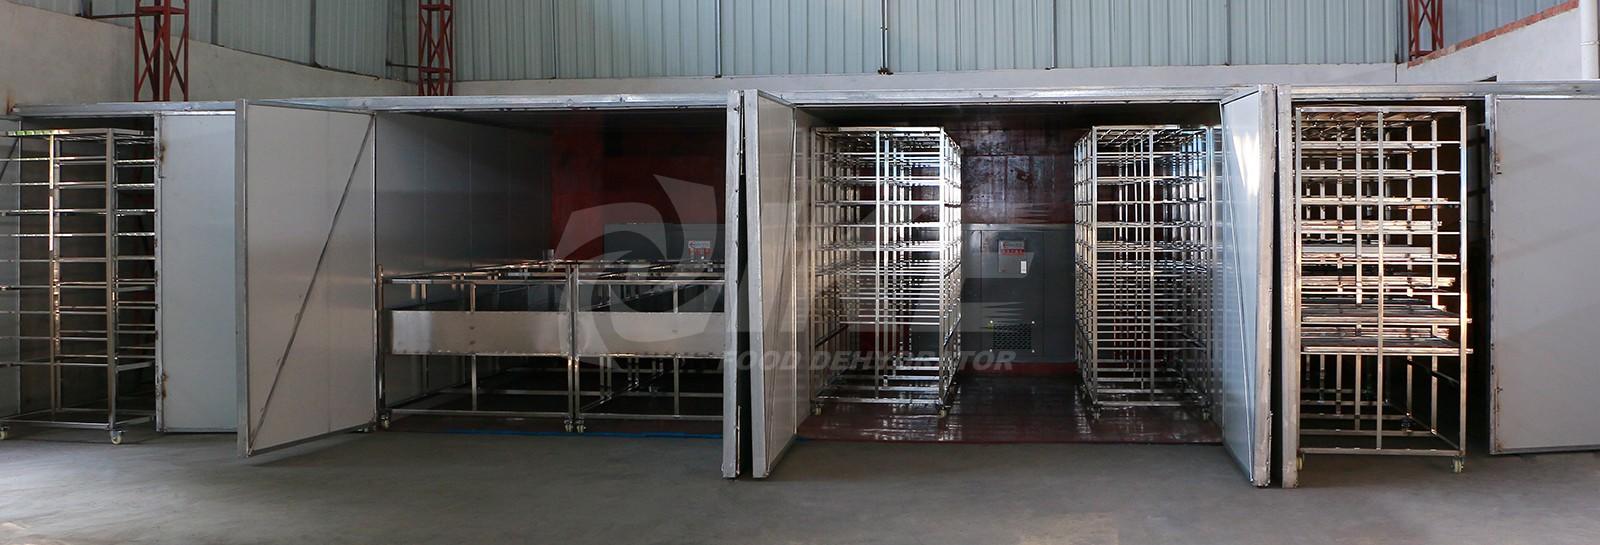 IKE-Manufacturer Of Food Drying Machine Wrh-500a Commercial Middle Temperature